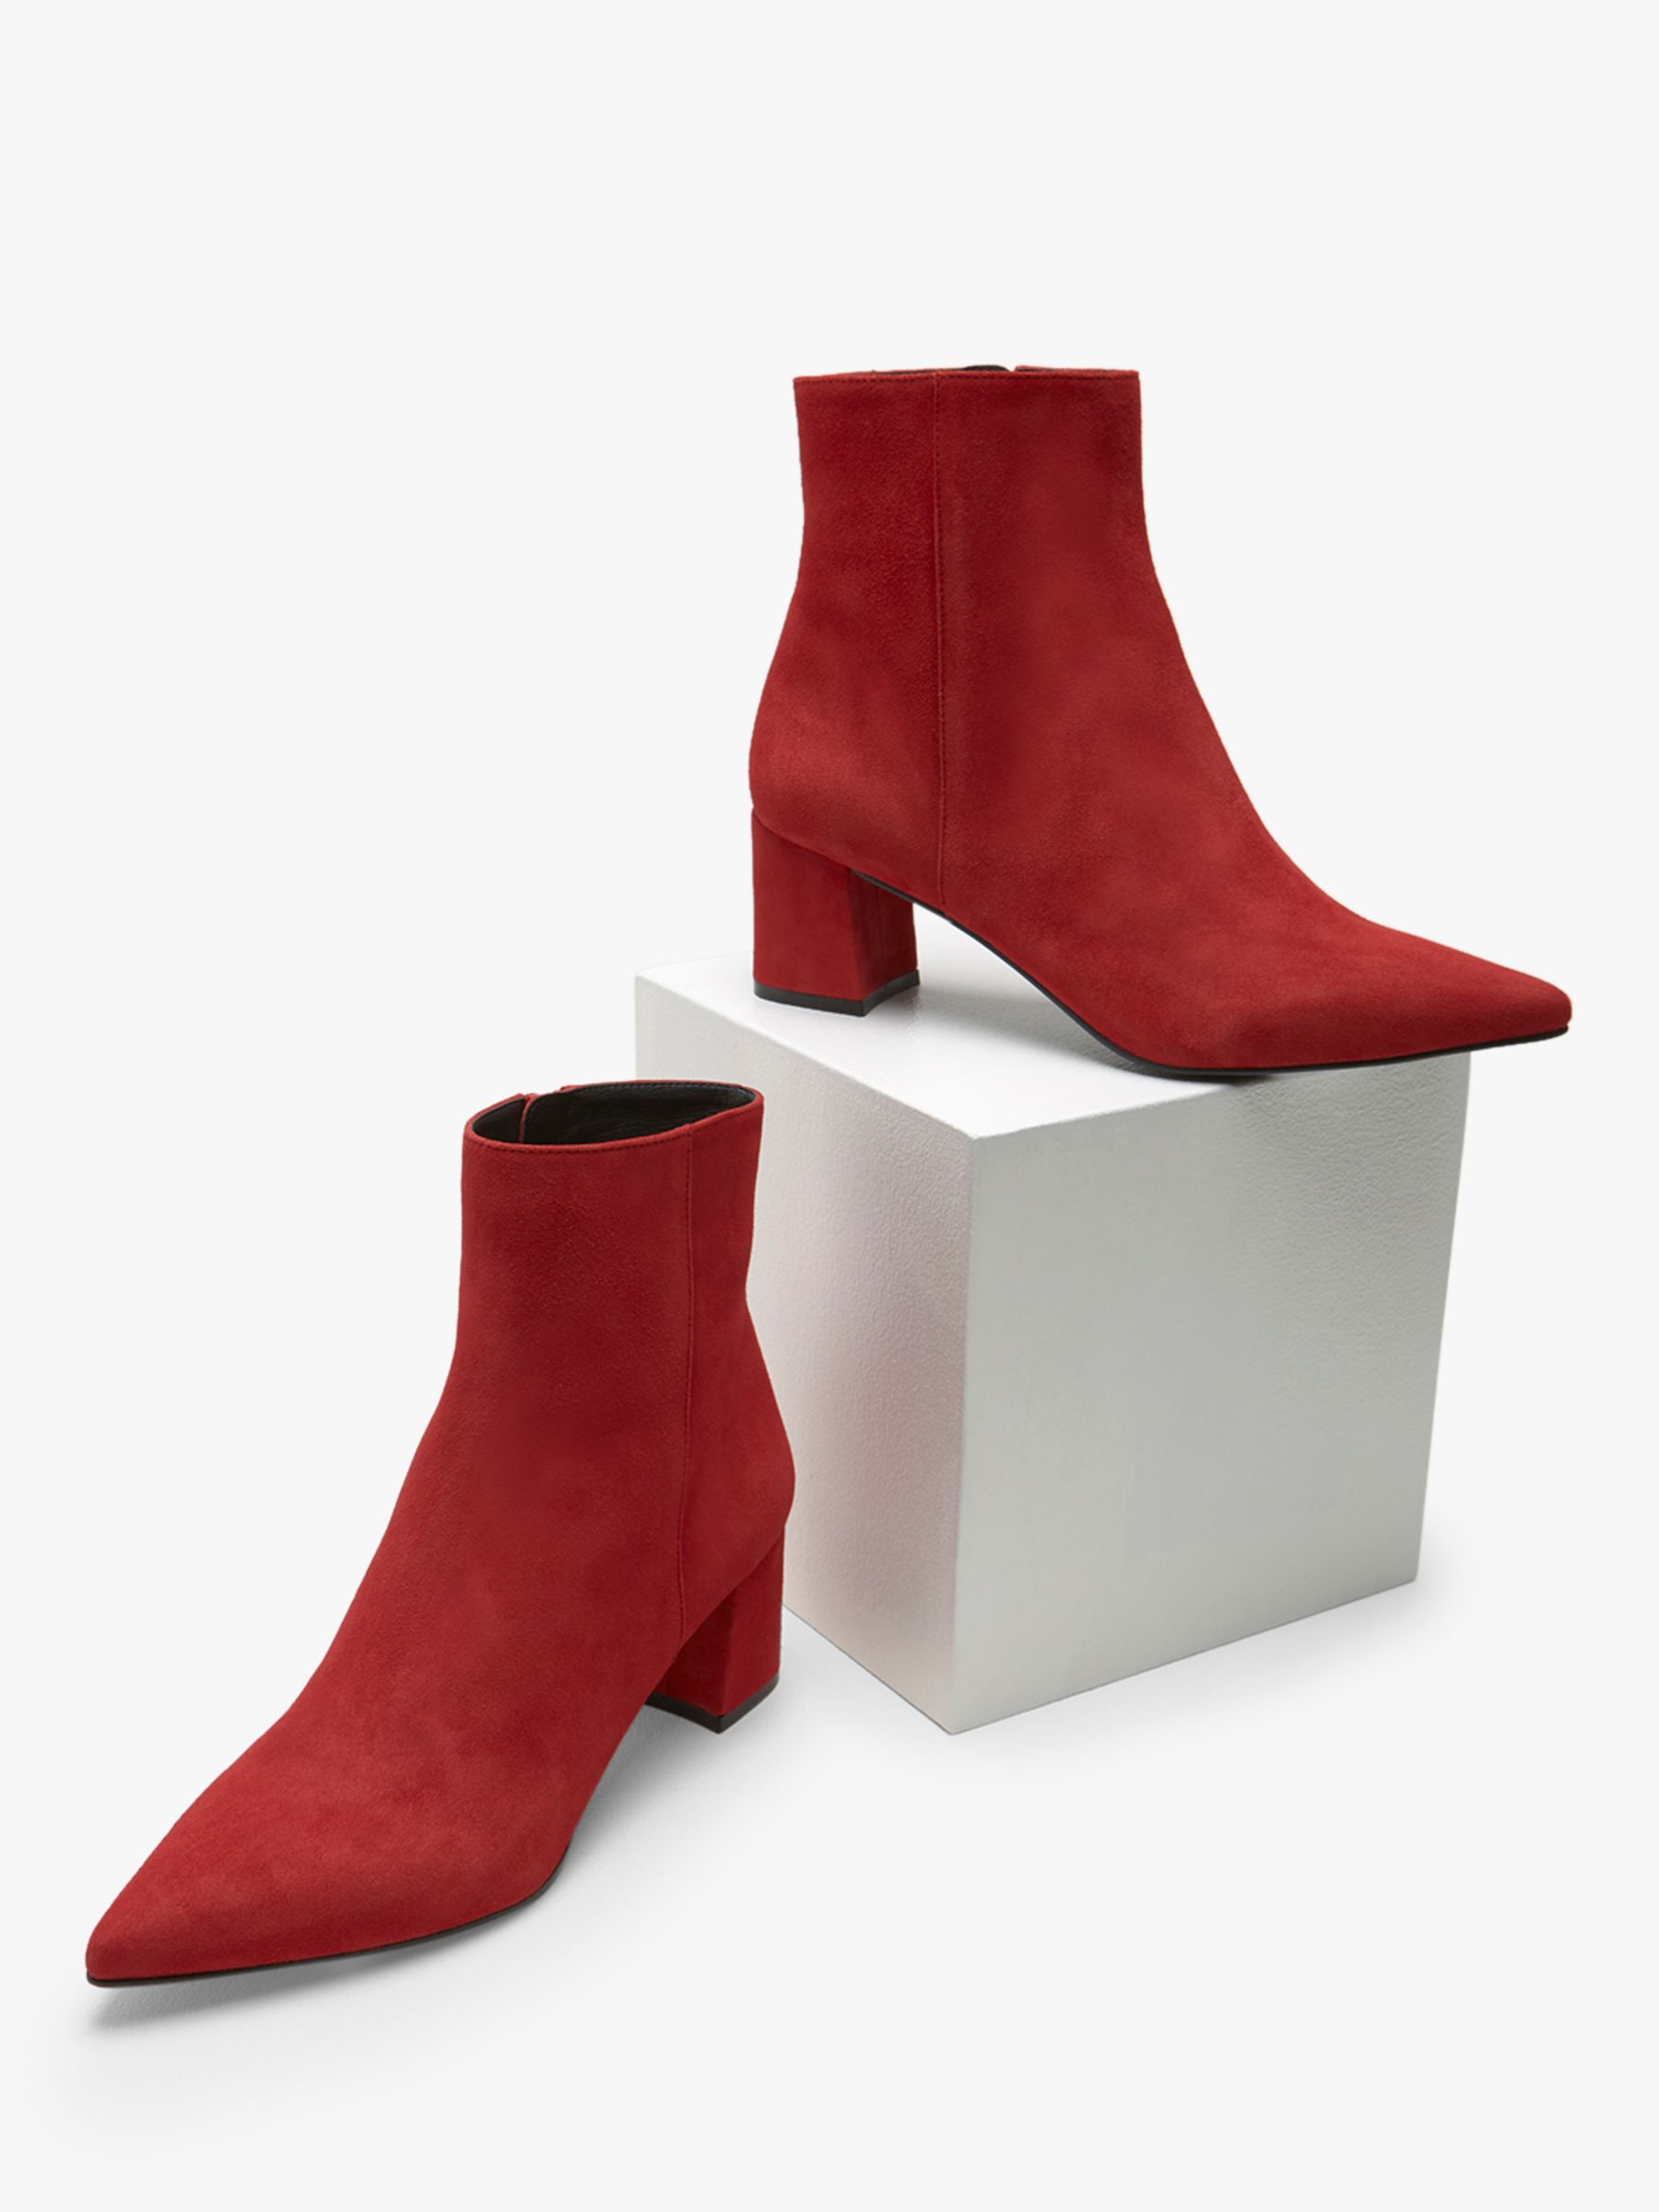 Mint Velvet Olivia Suede Ankle Boots, Red